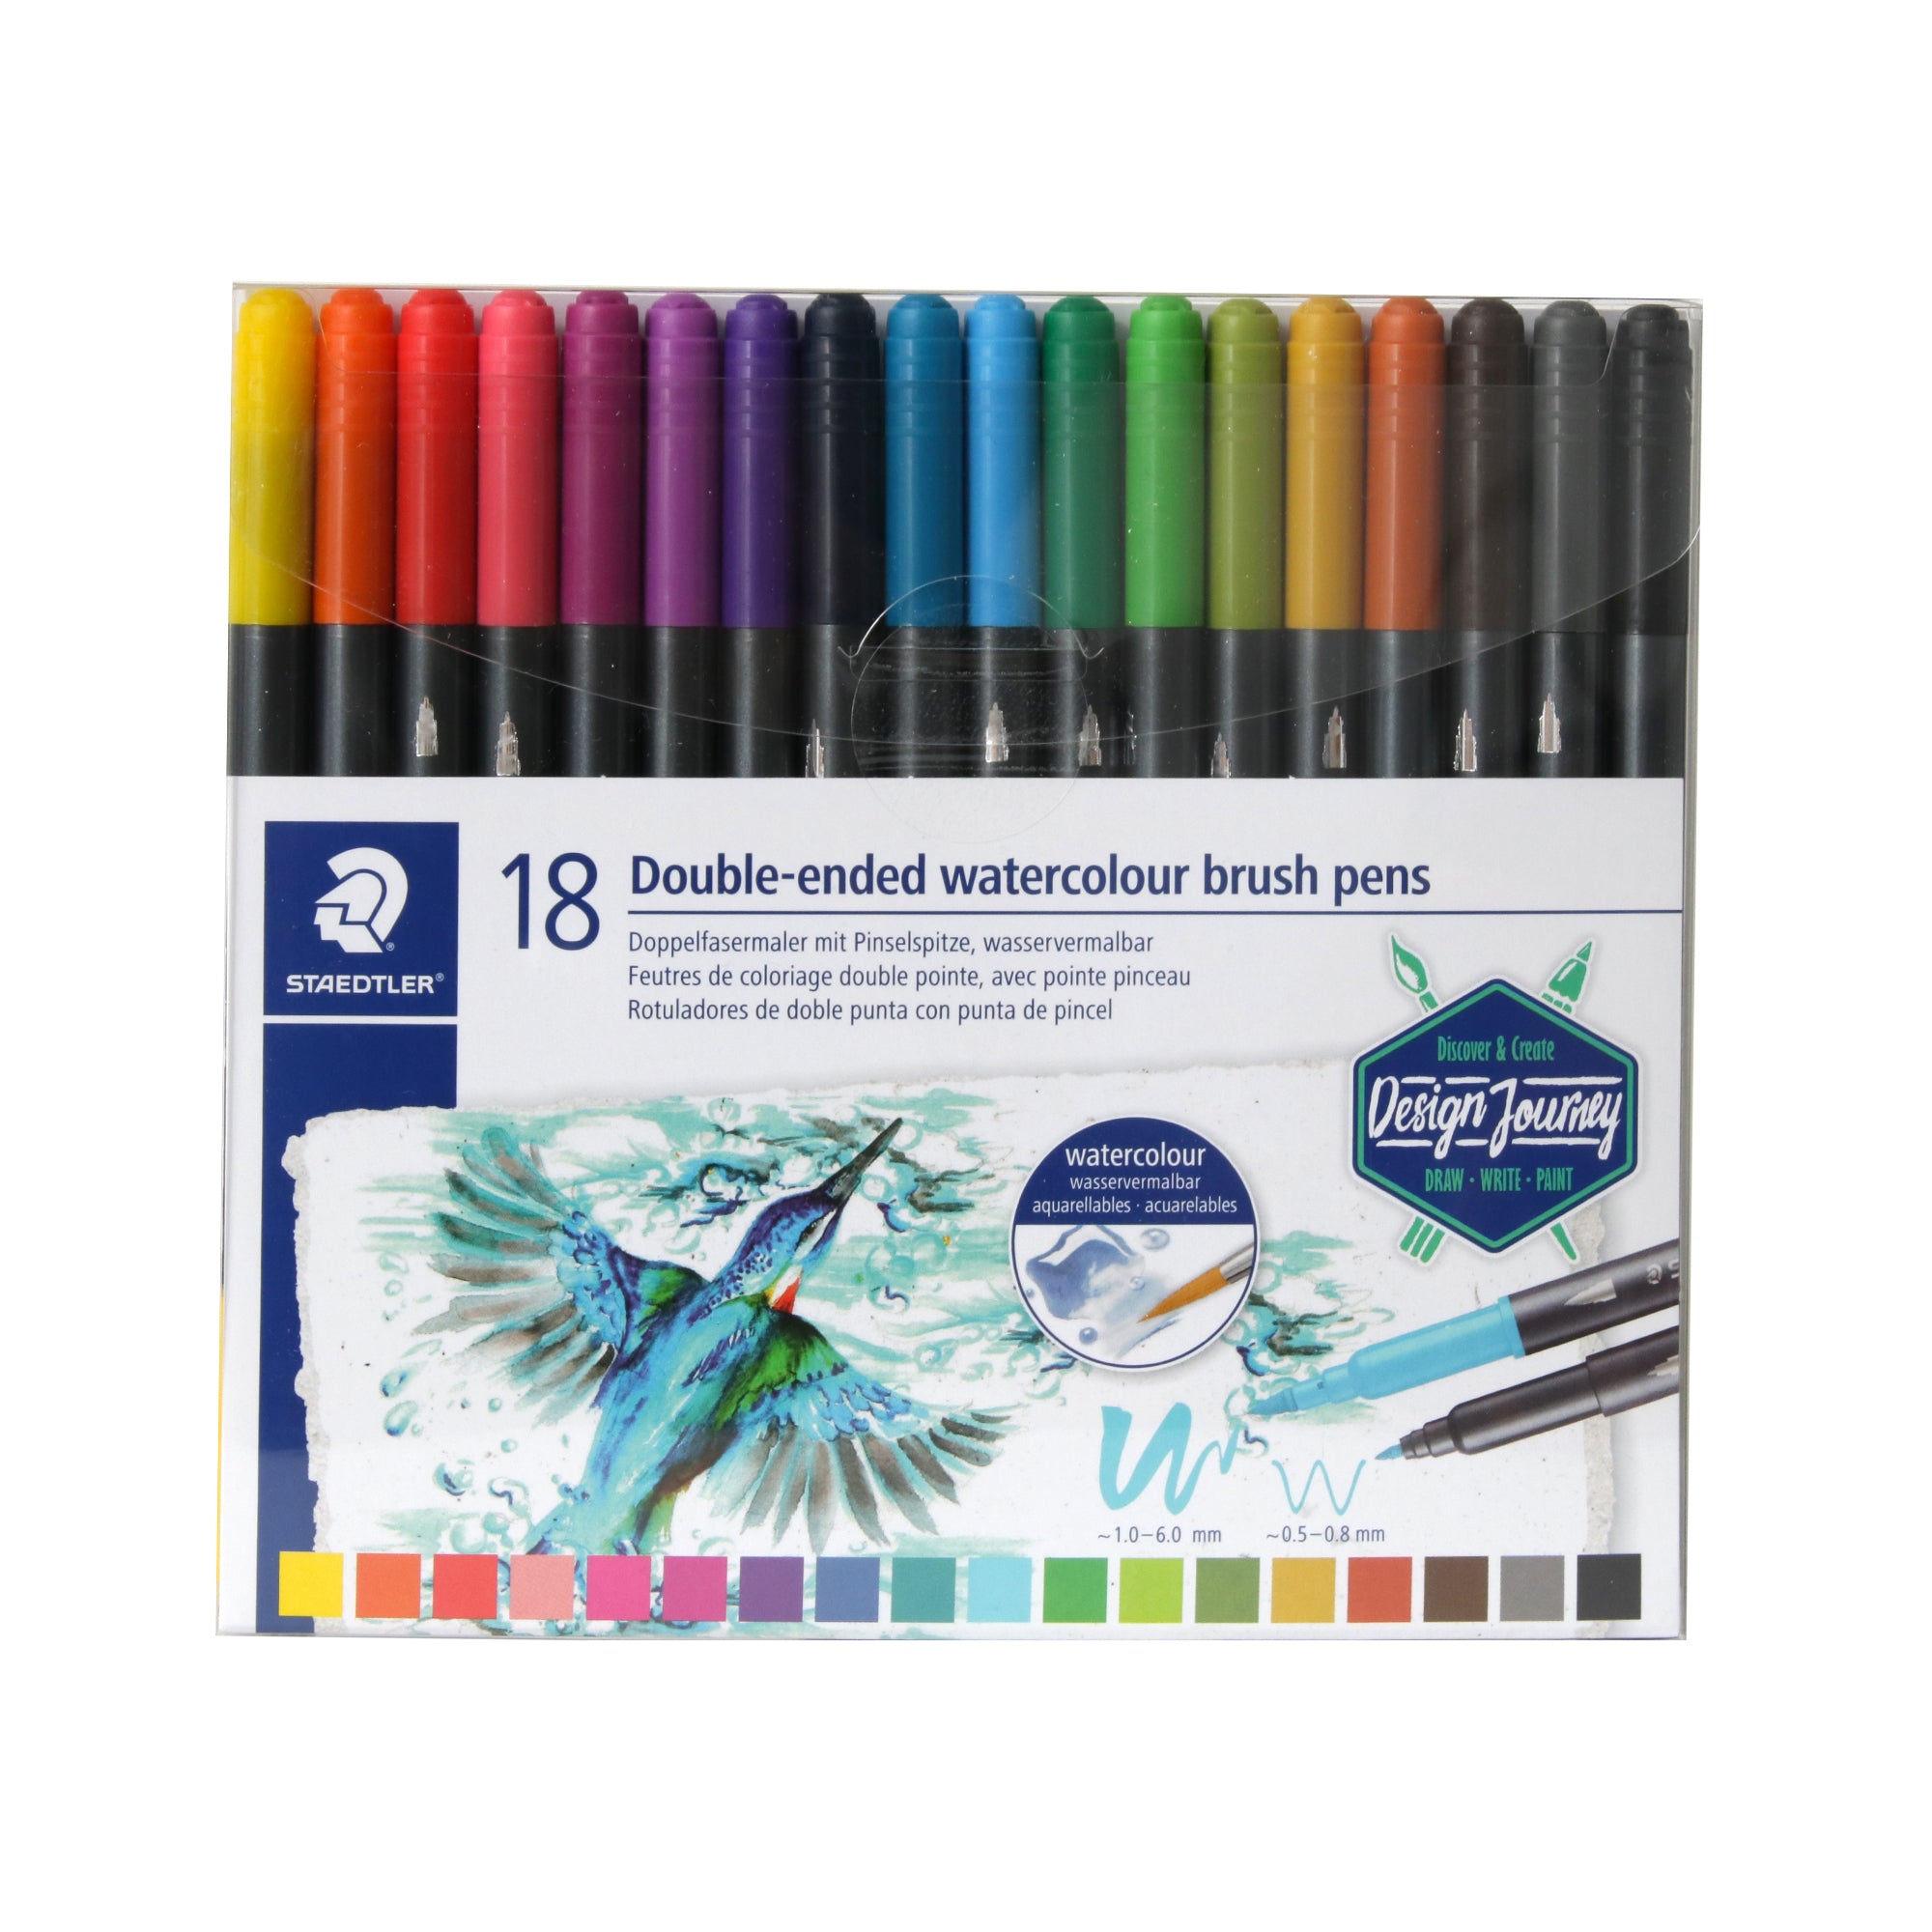 Staedtler 3001 TB36 ST Double-Ended Watercolour Brush Pen, 1 Count (Pack of  1), Multicolor